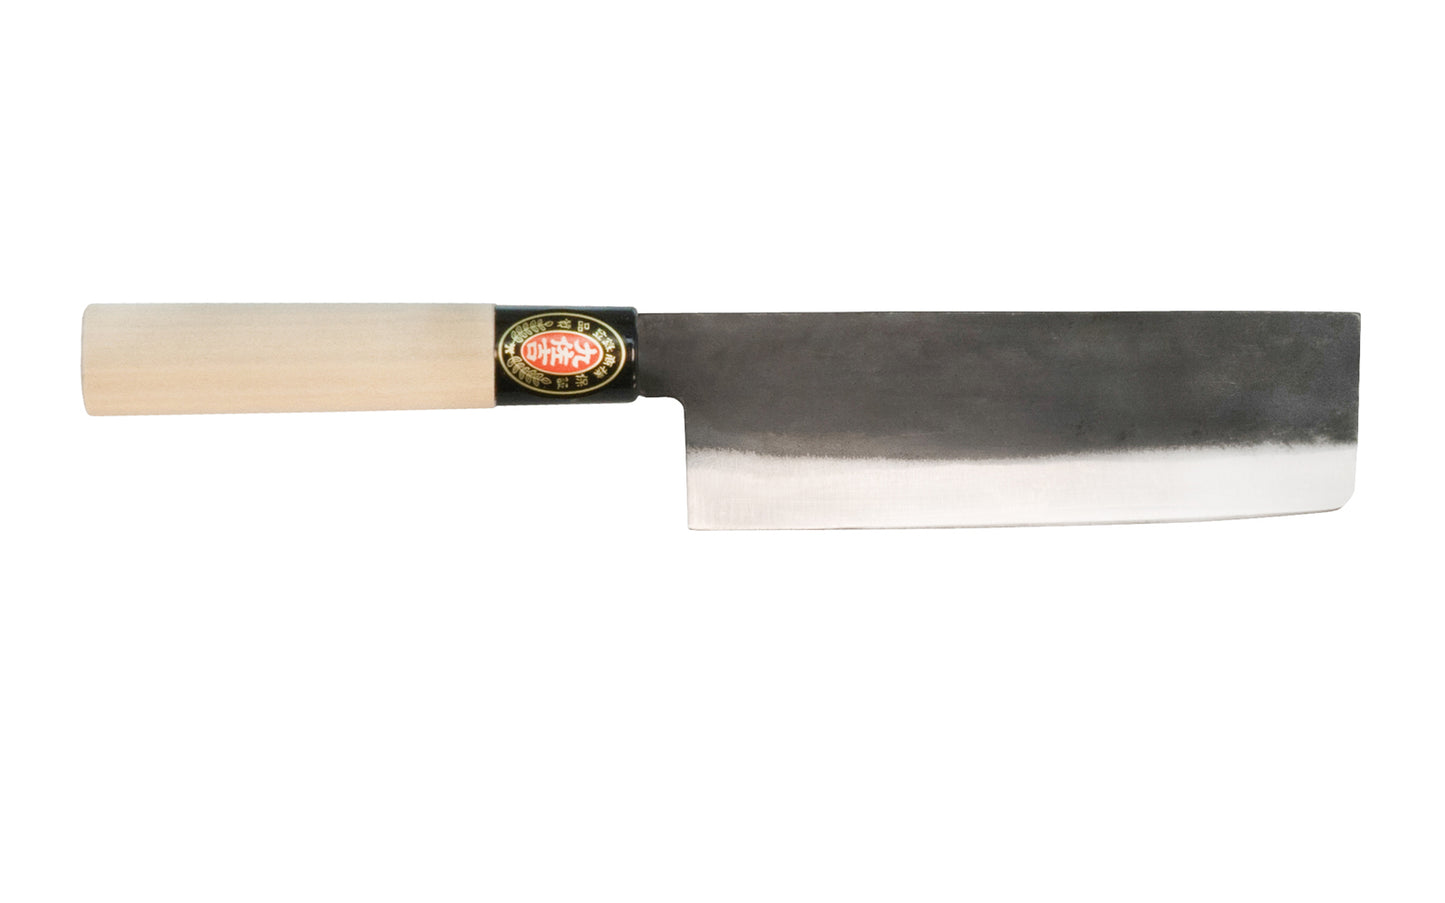 Japanese Kyusakichi "Usuba Hocho" Laminated Knife is kitchen knife designed for slicing vegetables. Blade has a 6-1/4" (170 mm) cutting edge & great for slicing firm vegetables. 2-1/16" wide blade. Laminated with high carbon & mild steel. Wooden Handle. Made in Japan. Model 6021. 4951572006142. Kusakichi Kitchen Knife